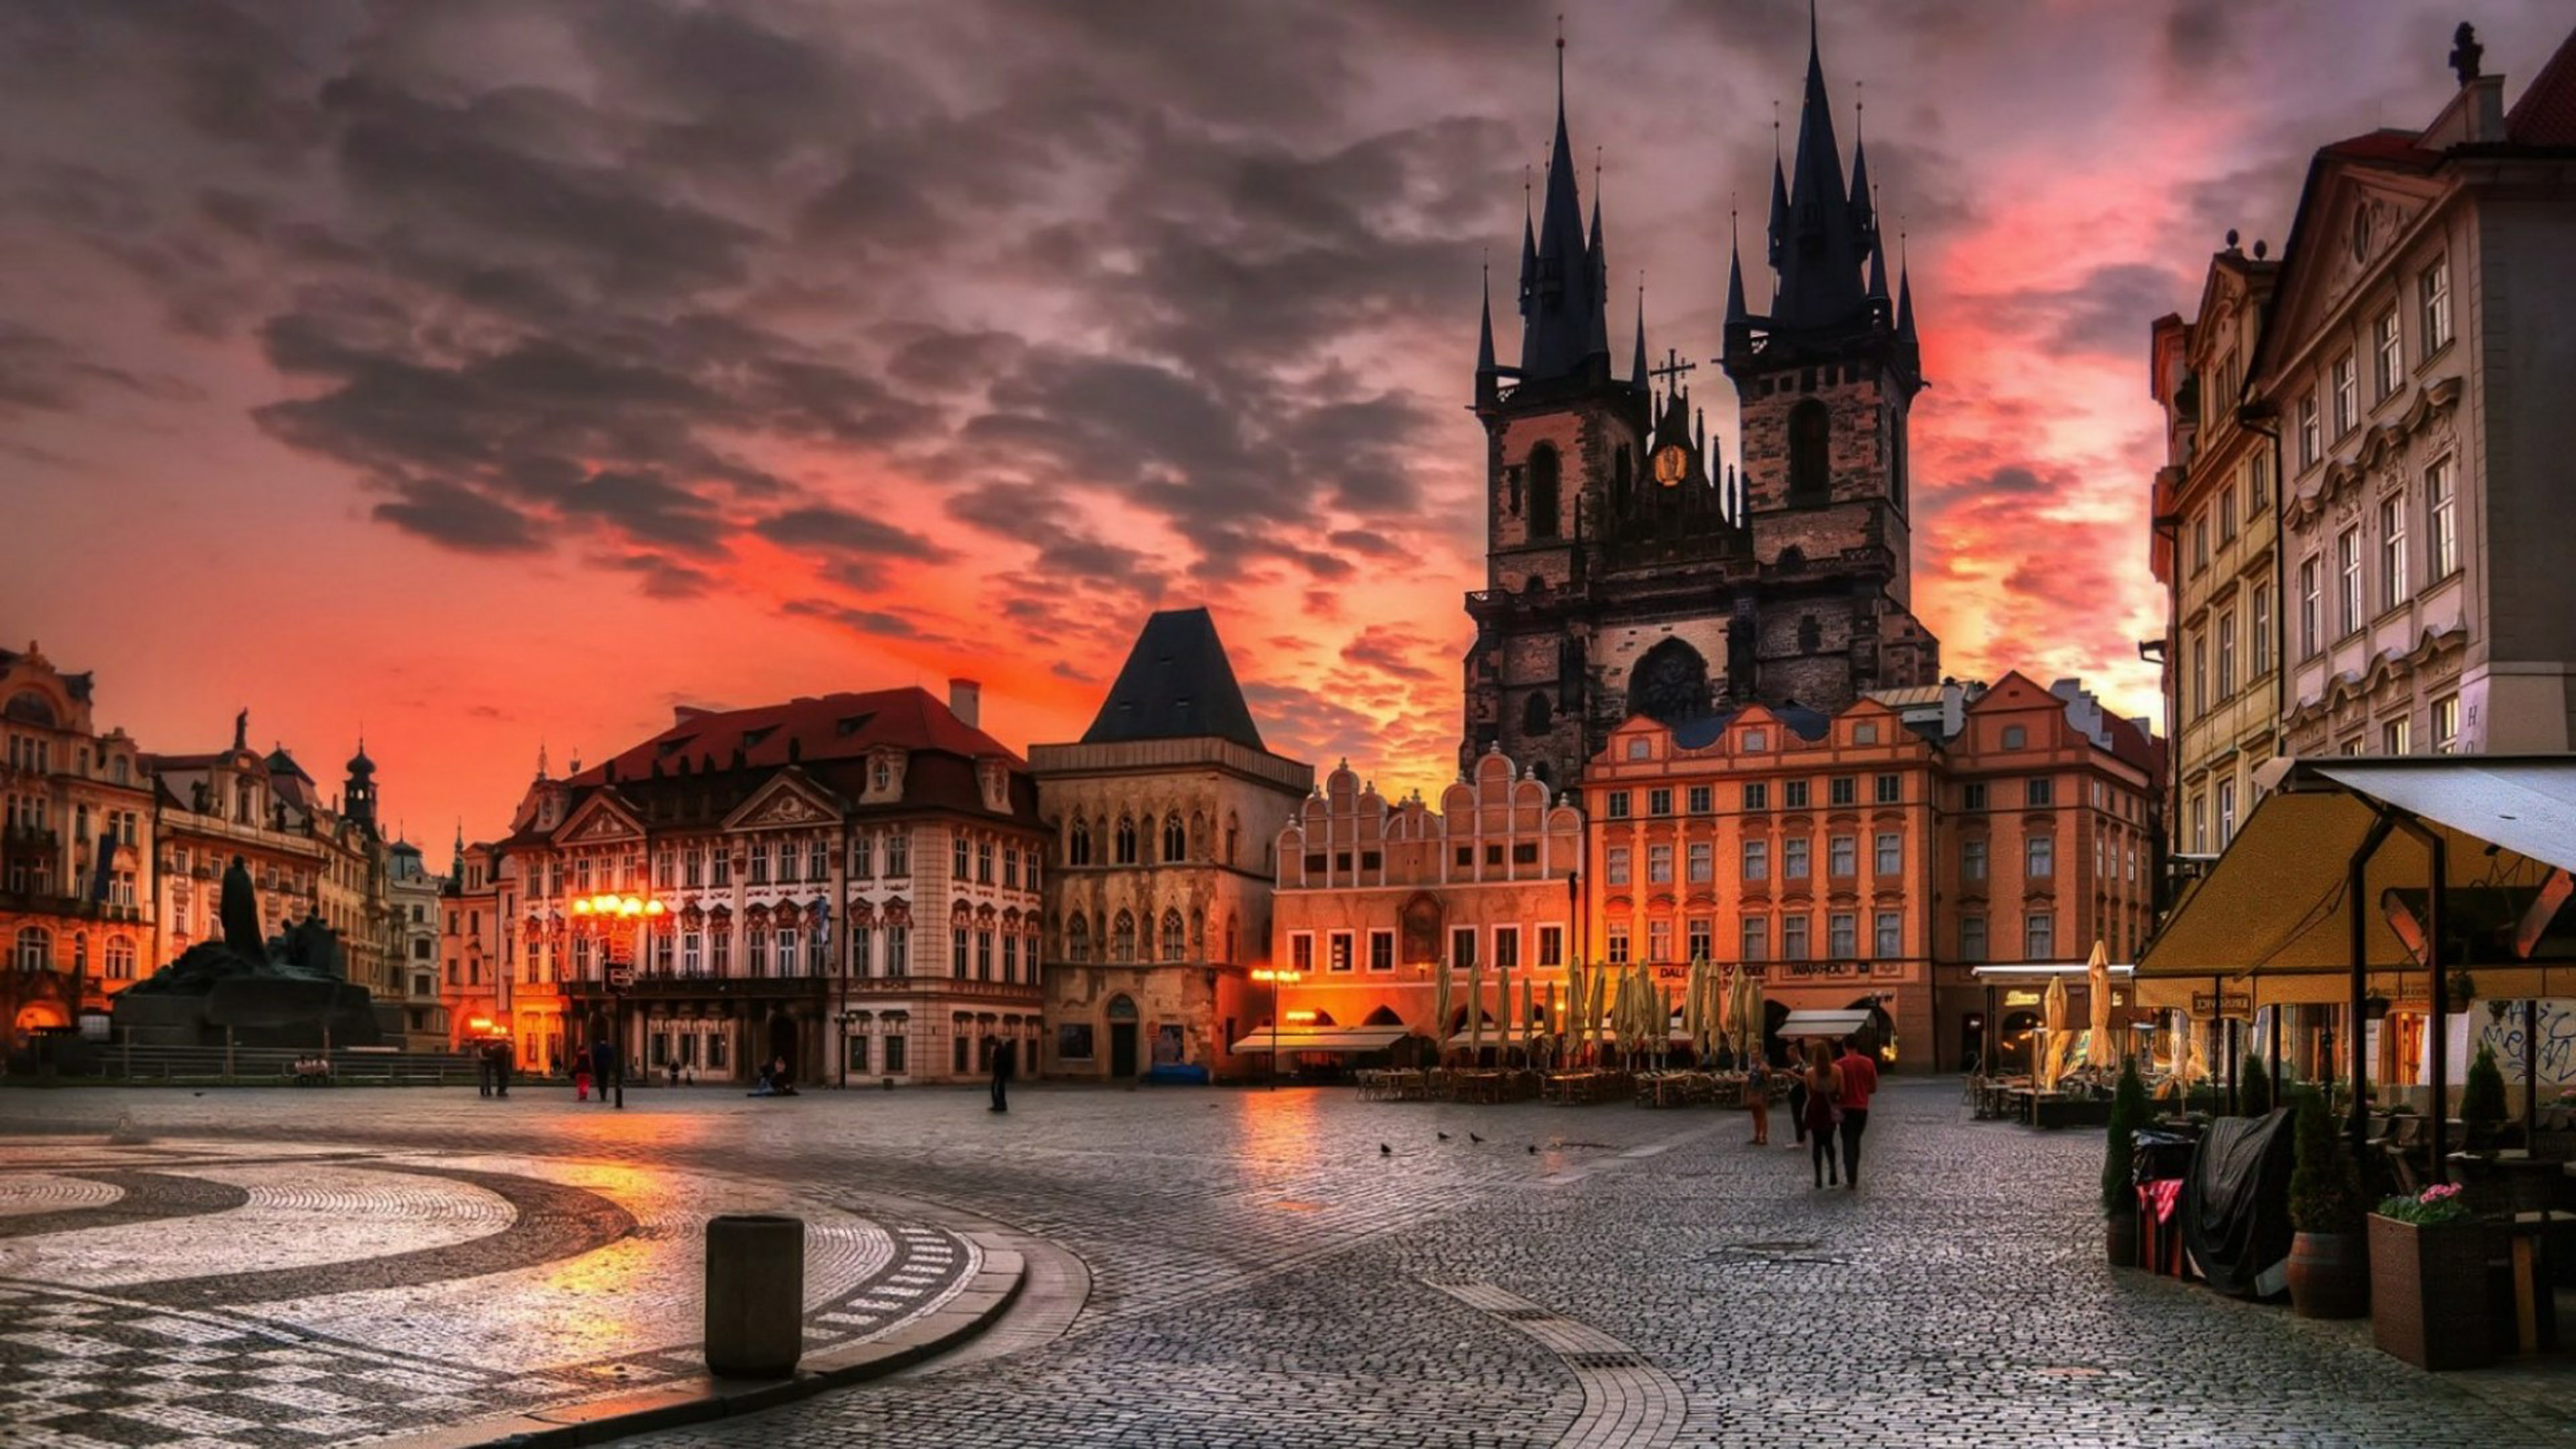 Old Town Square Prague Czech Republic Between Wenceslas Square And The